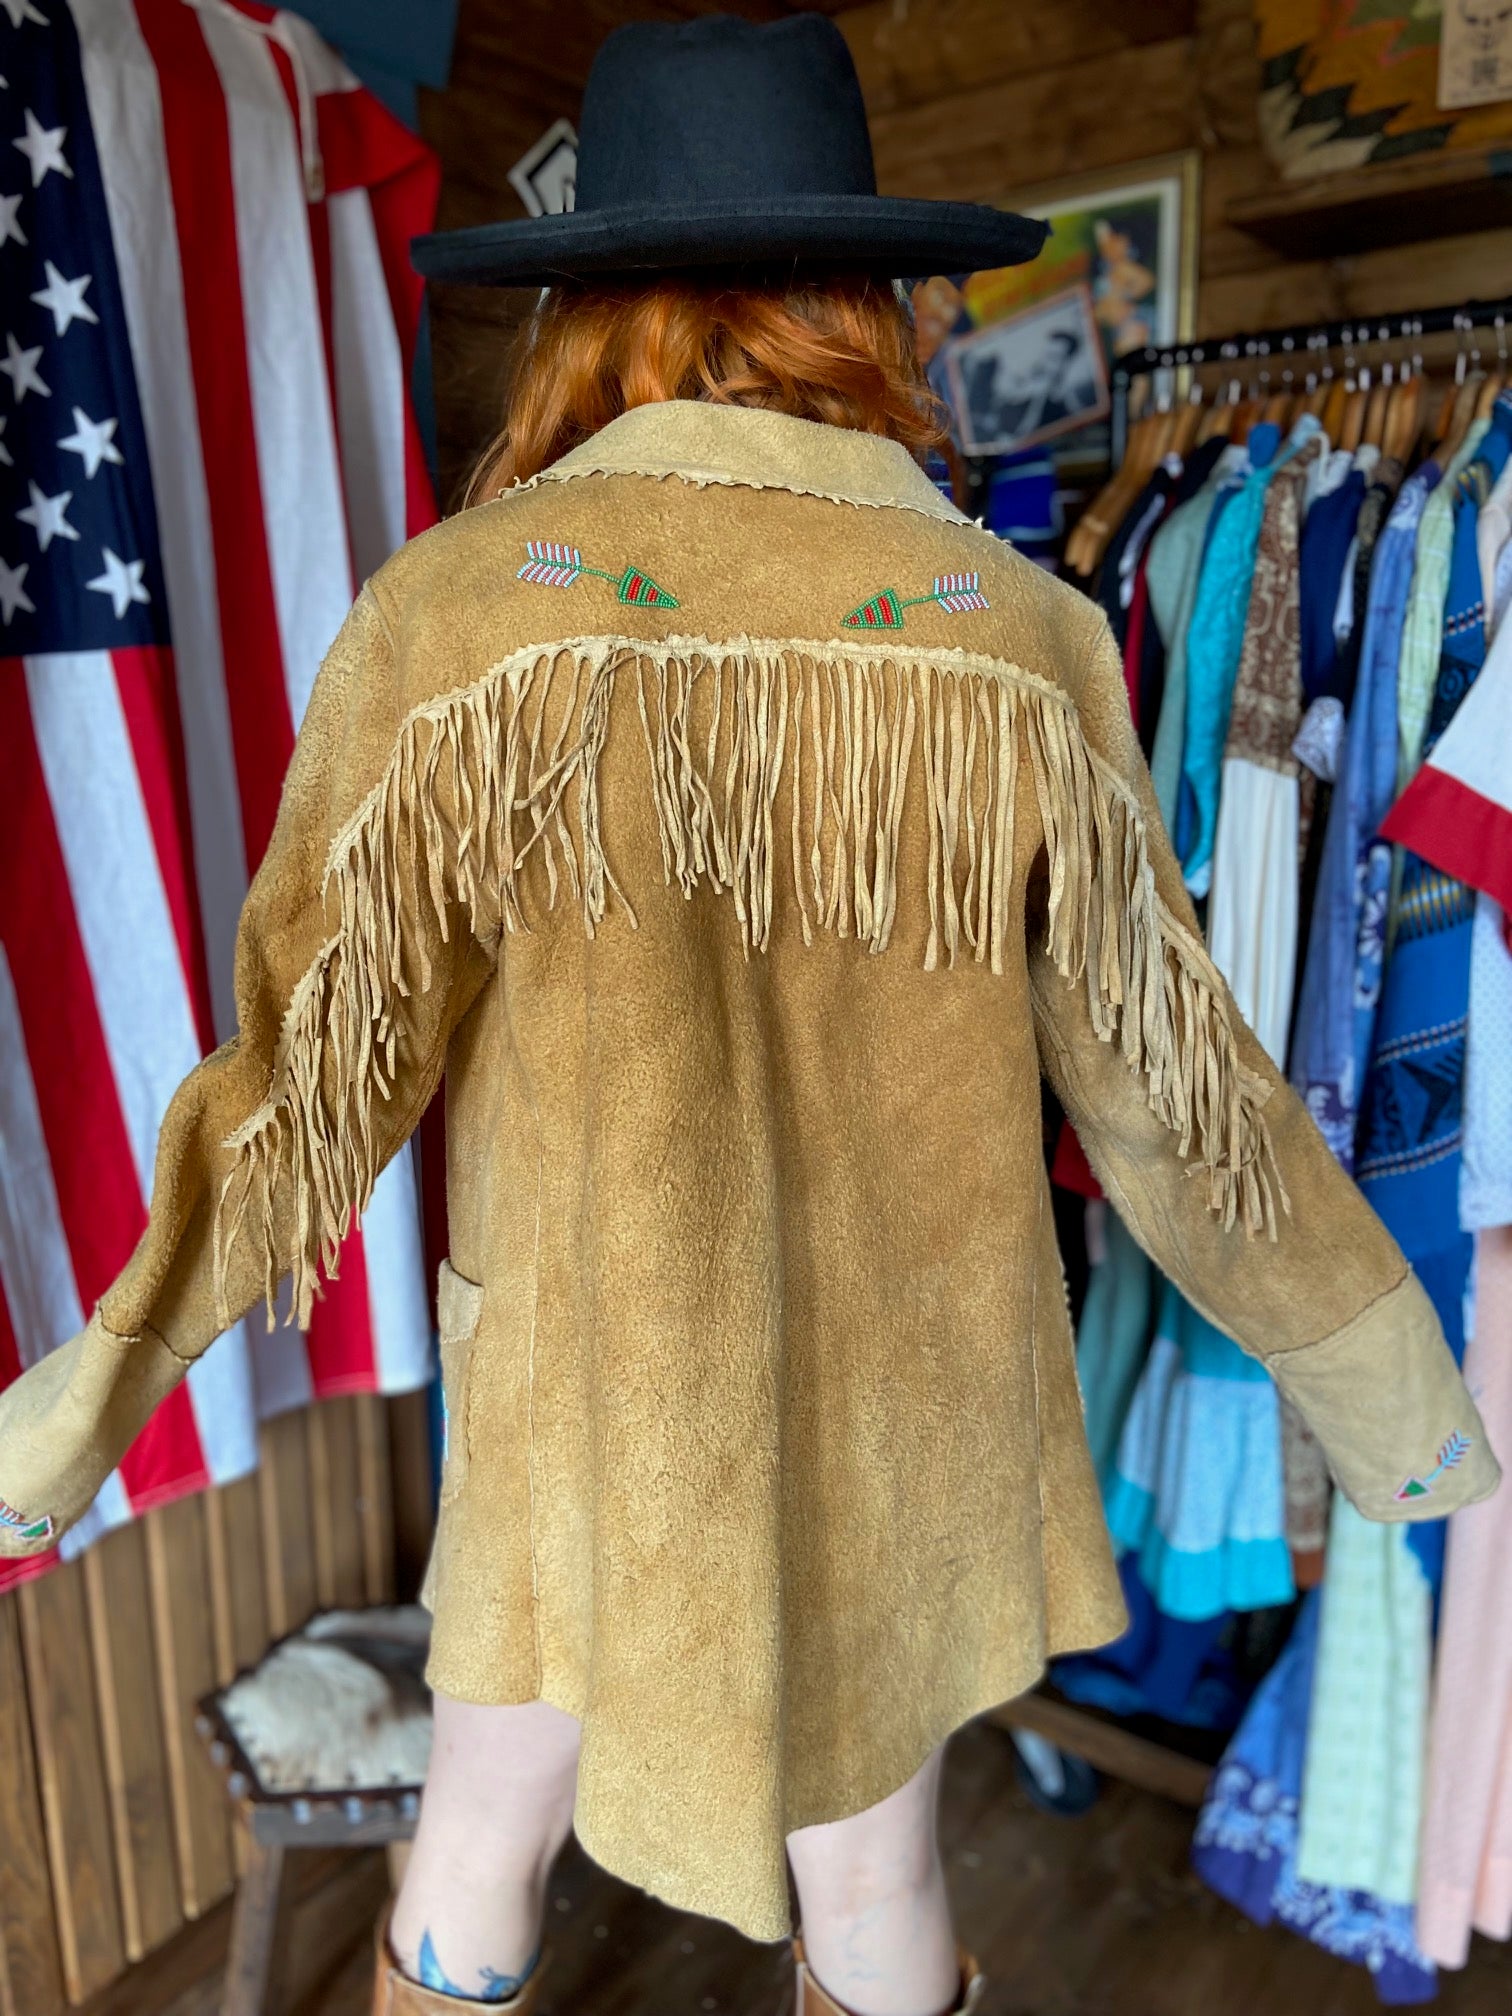 Long sued soft leather 60s western ranch frill jacket